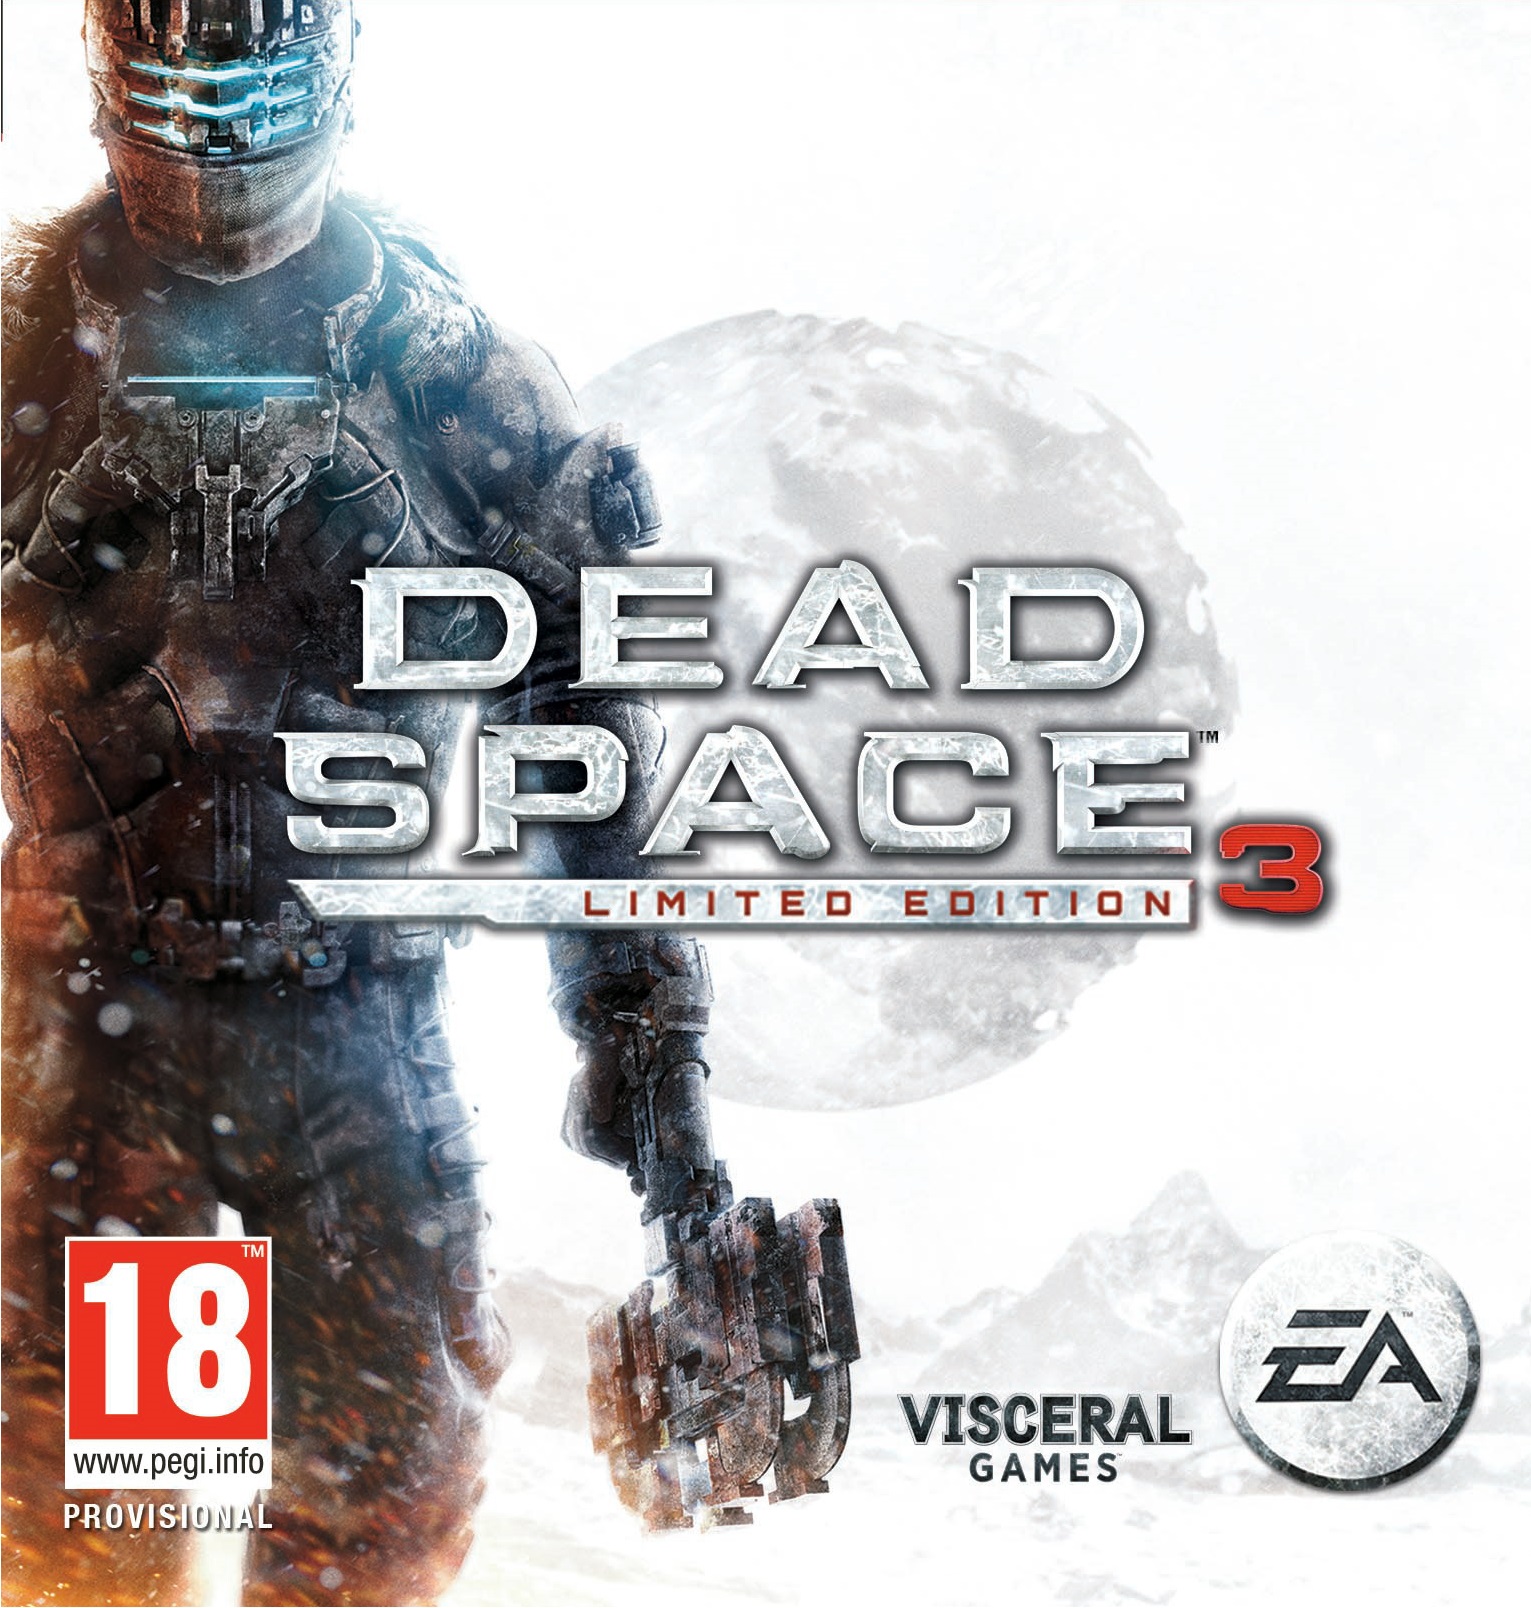 dead space 3 -- limited edition (sony playstation 3, 2013)